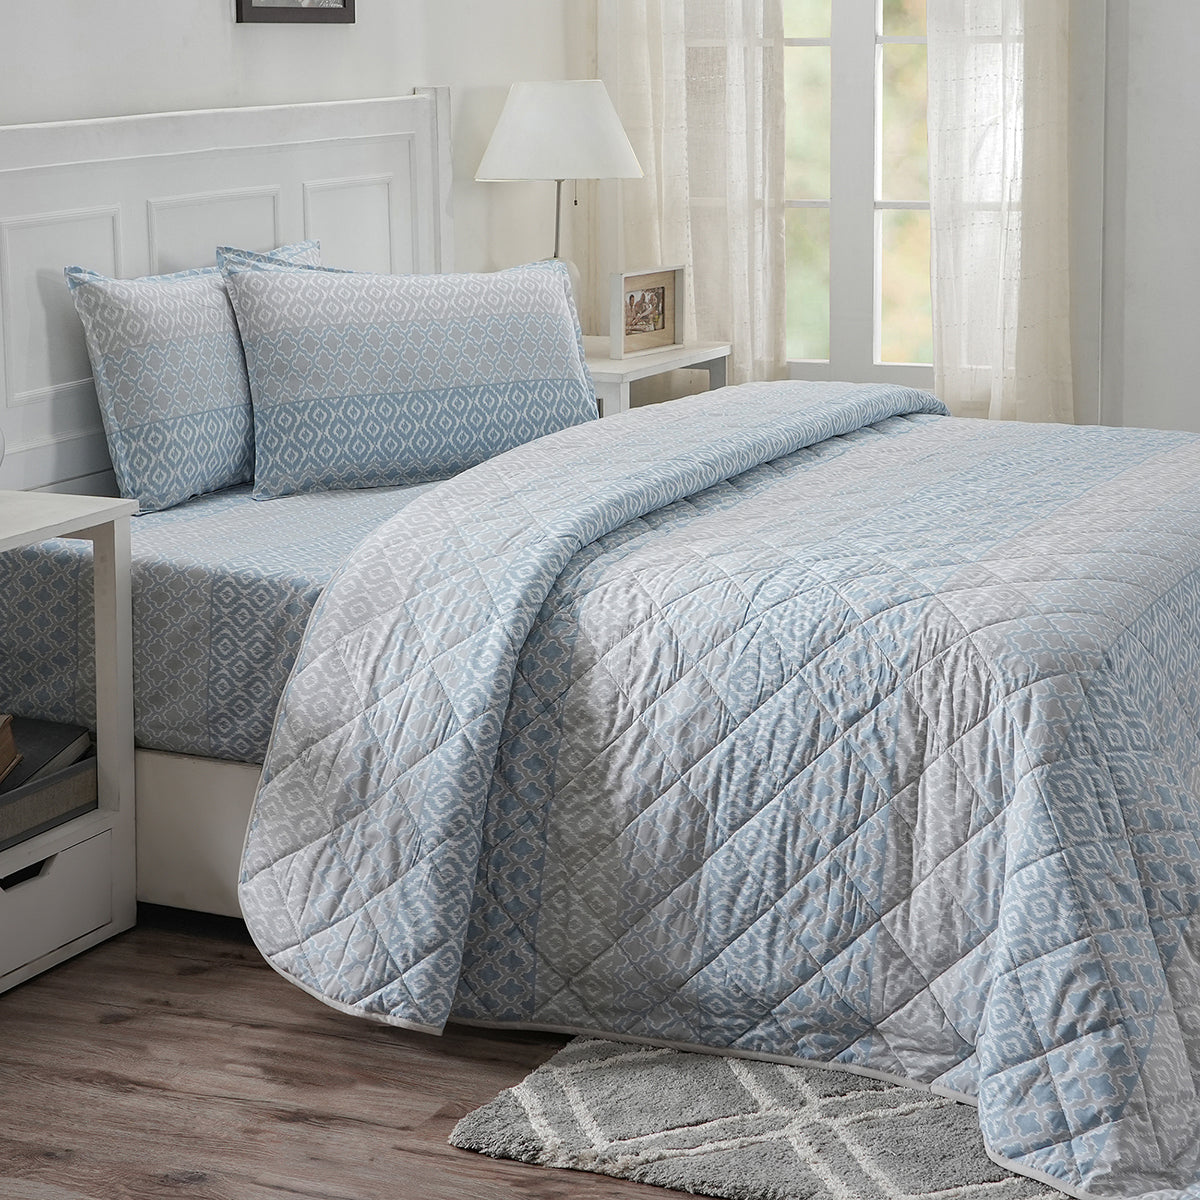 Optimist Bloom Multi Ikat 4PC Quilt/Quilted Bed Cover Set